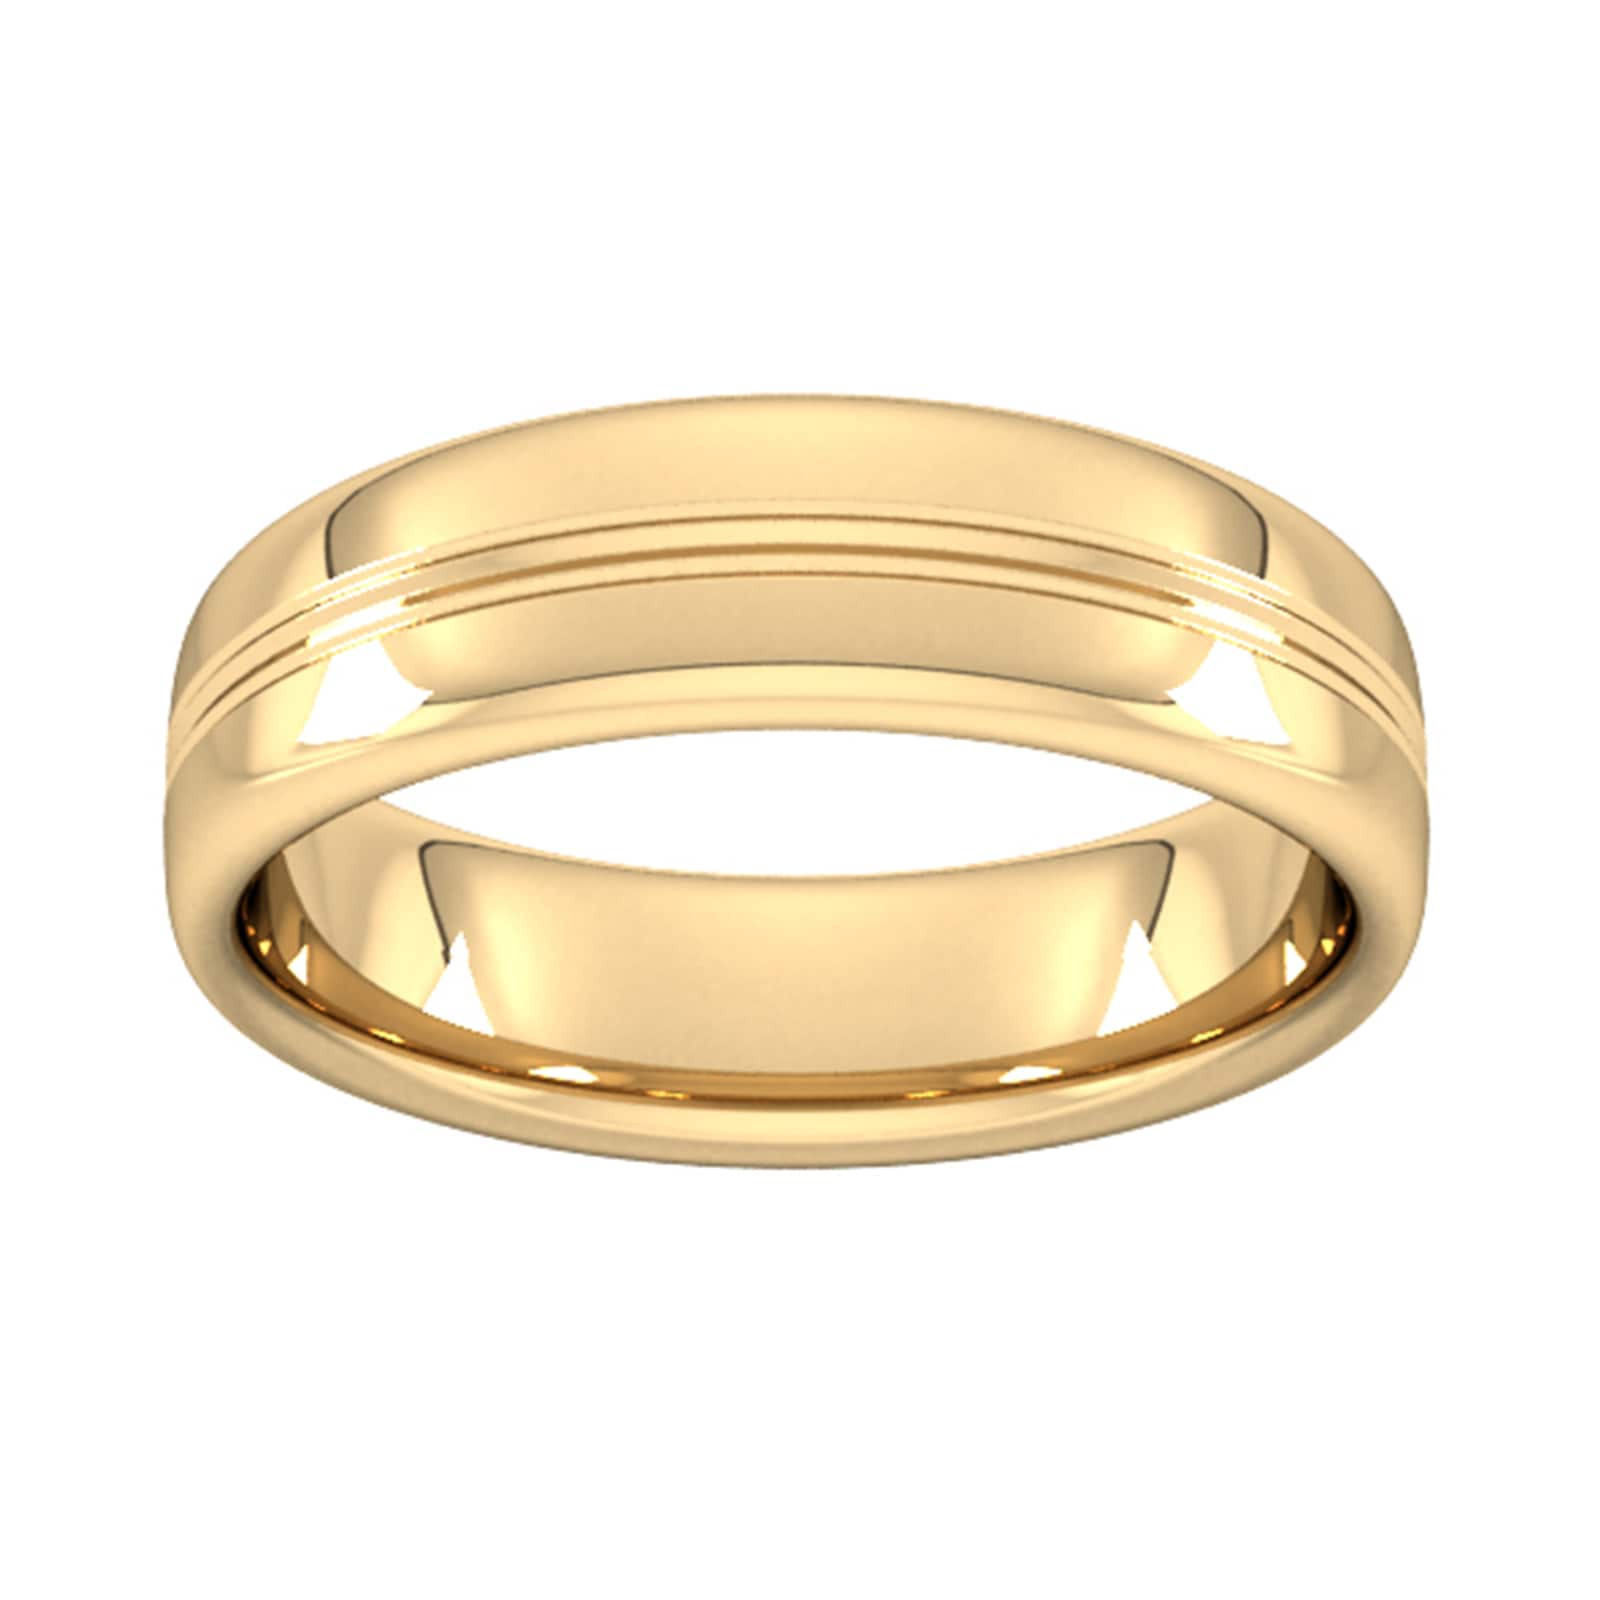 6mm Slight Court Heavy Grooved Polished Finish Wedding Ring In 9 Carat Yellow Gold - Ring Size O